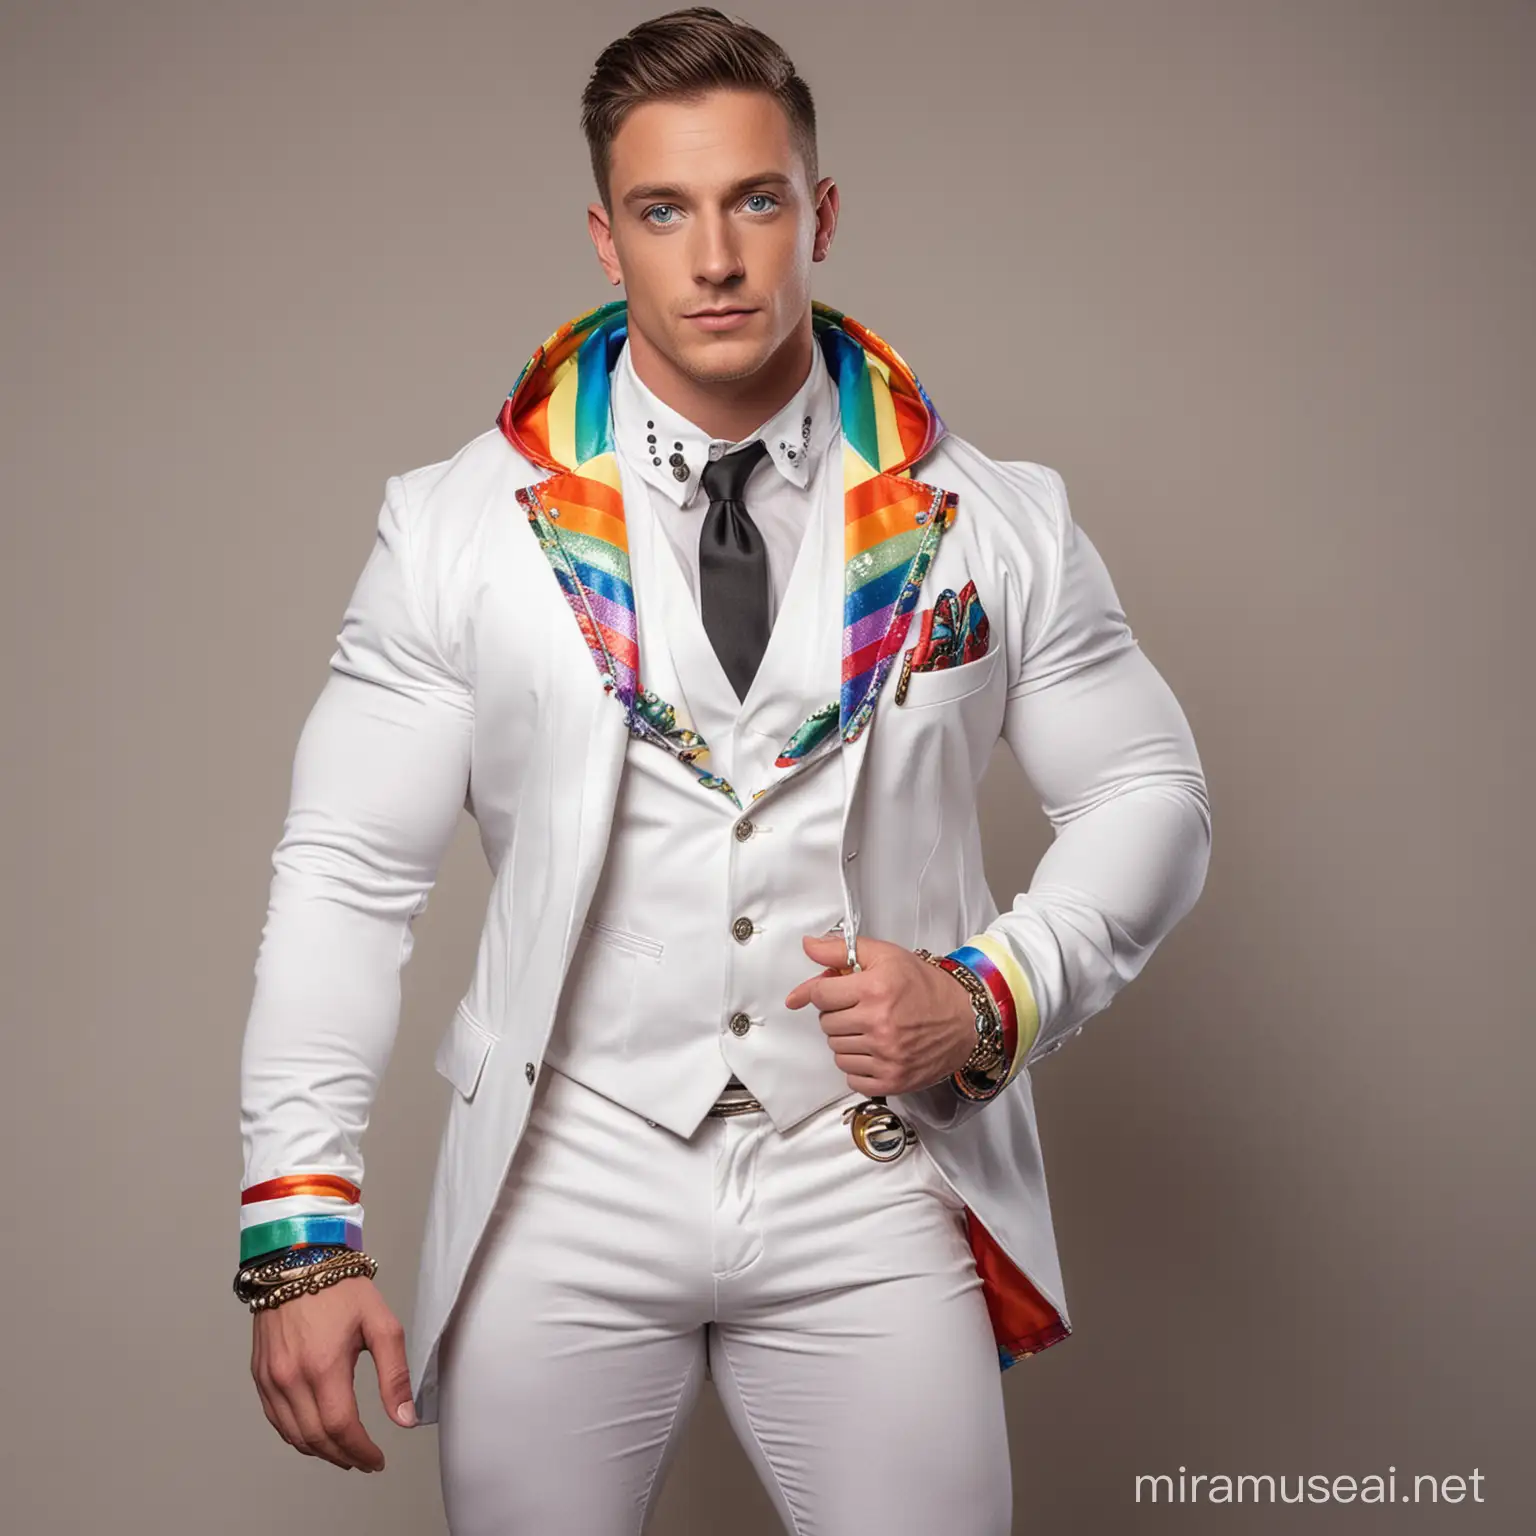 Muscular White Male Bodybuilder in Rainbow Pride Steampunk Tuxedo Poses for YouTube Video Selfie